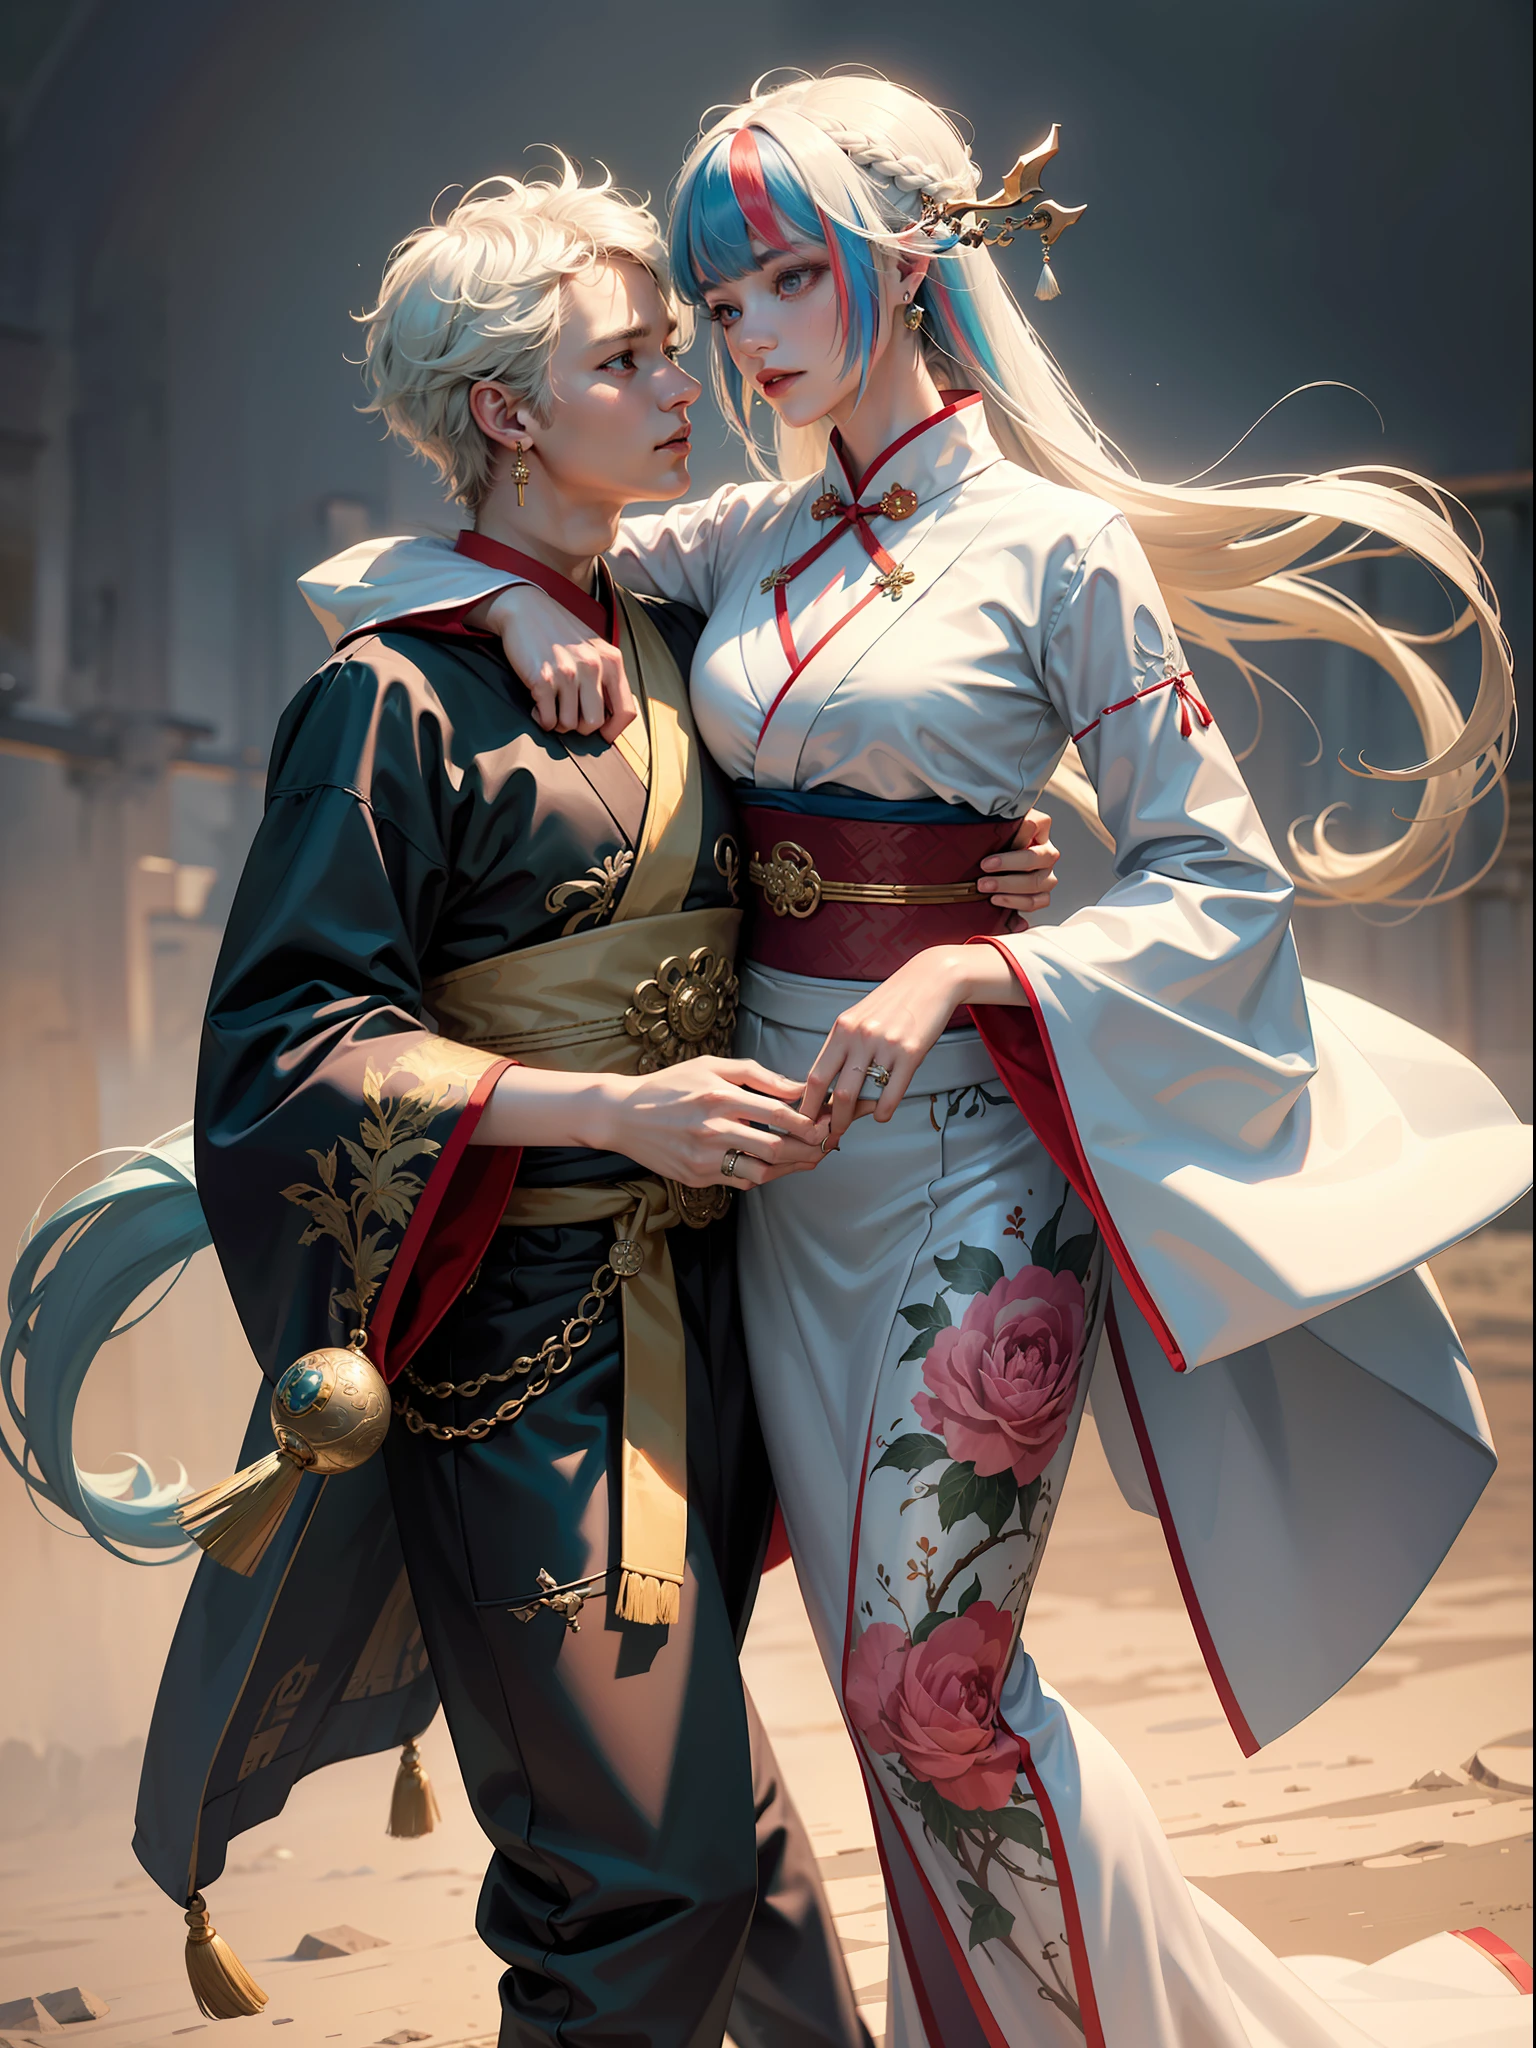 Concept Art, "1 Couple, Male Focus, Finned Ears, Multicolored Hair, Handsome Boy, Long White Hair, Tassels, Bangs, Carp, Colorful, Bold Colors, White Kimono, (Open) Kimono, Traditional Chinese Clothing, Close-up, Intimate Interaction, Stud Earrings, Rings, Sweat, Illuminate People", Colorful, Master Composition with Focus on Key Figures, Realism, Masterpiece, Award-Standing, Best Quality, Masterpiece, Ultra Detailed, 8K, Extremely detailed CG Unity 8k wallpaper, complex, highly detailed, realistic